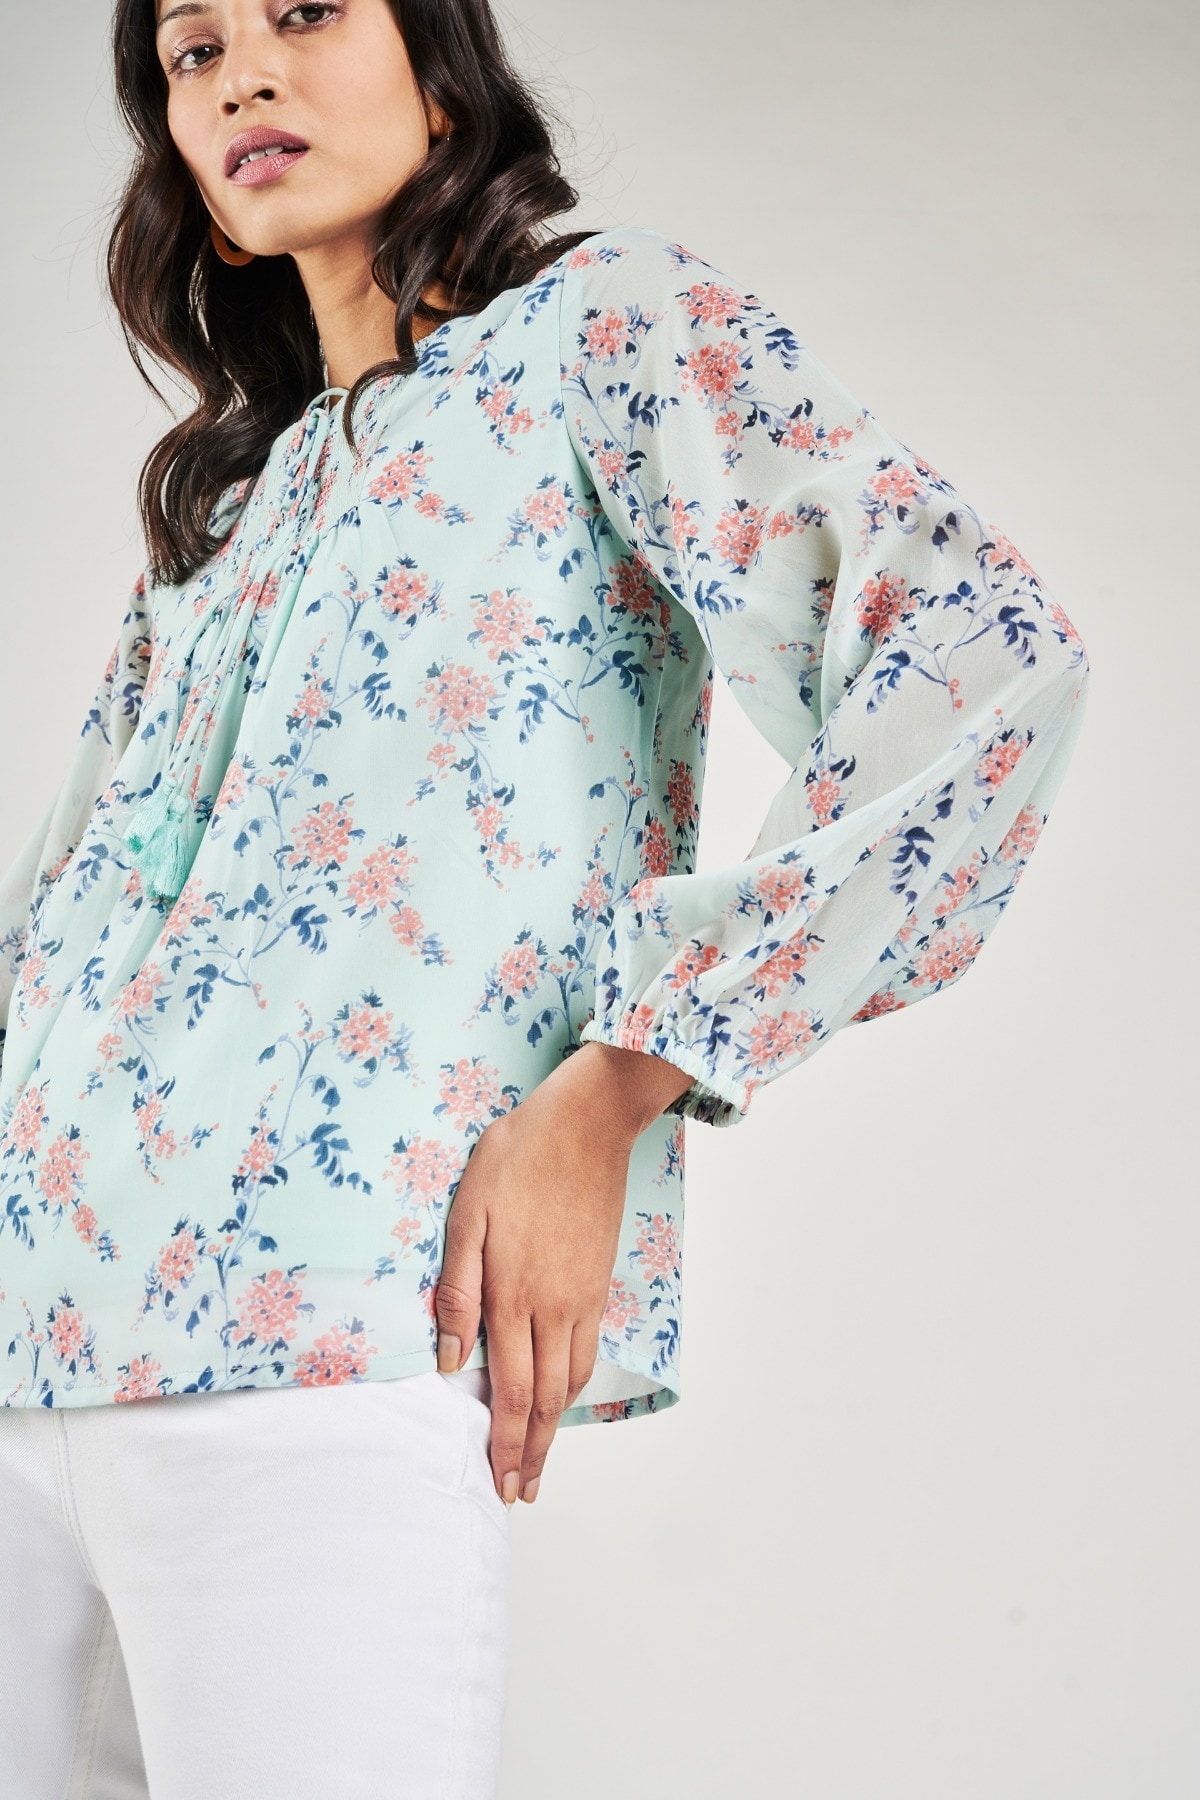 AND | Powder Blue Floral Printed A-Line Top